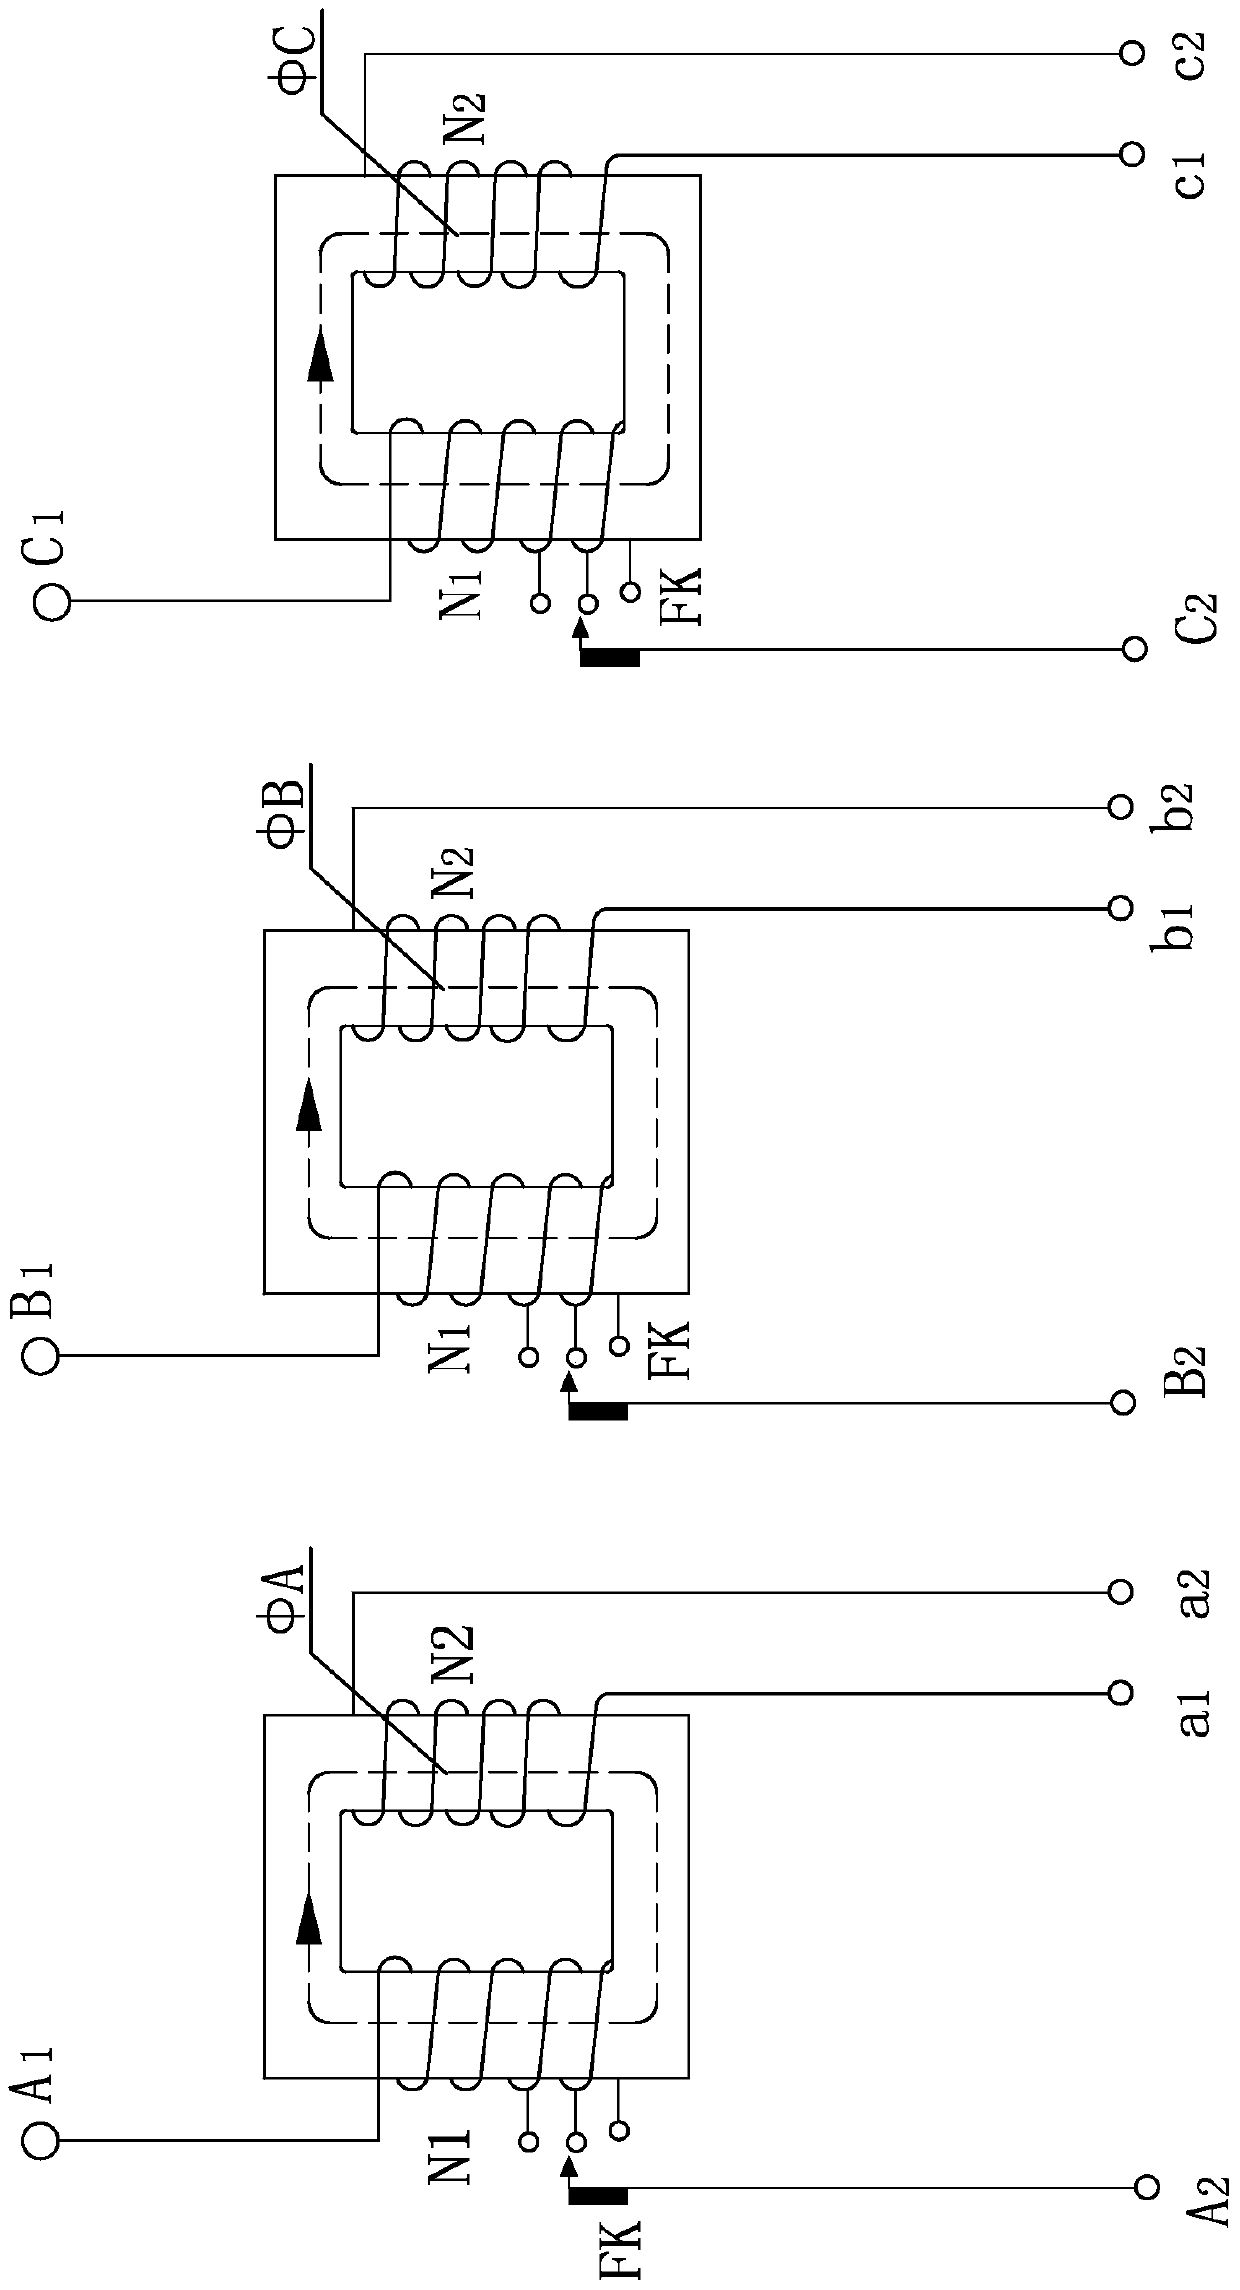 A device for automatically limiting short-circuit fault current in AC grid